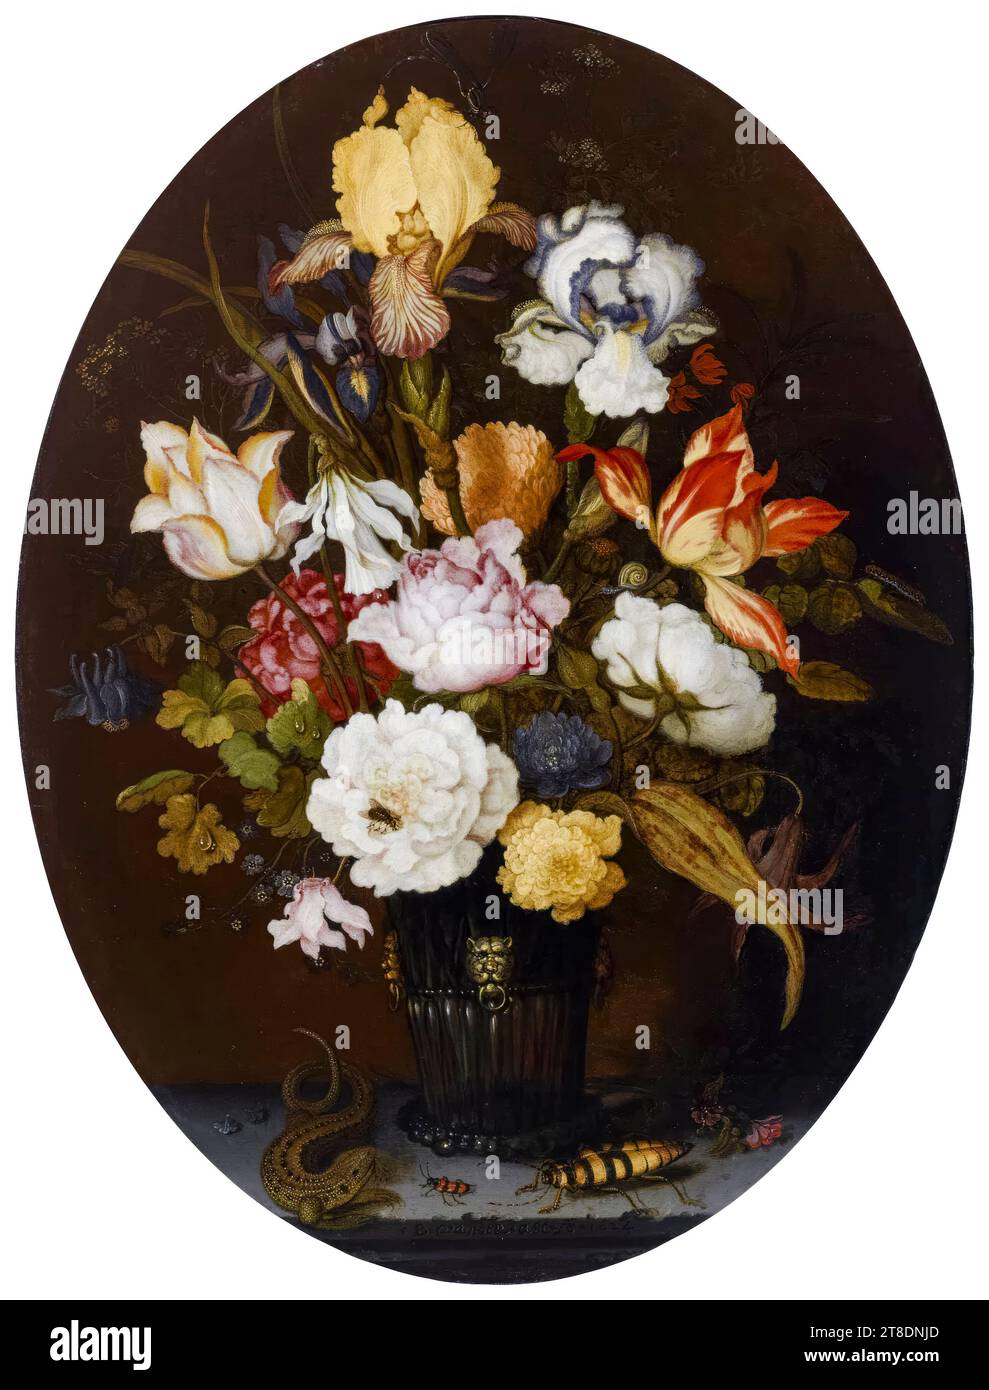 Balthasar van der Ast, Still Life of Flowers in a Glass Vase, painting in oil on copper, 1624 Stock Photo